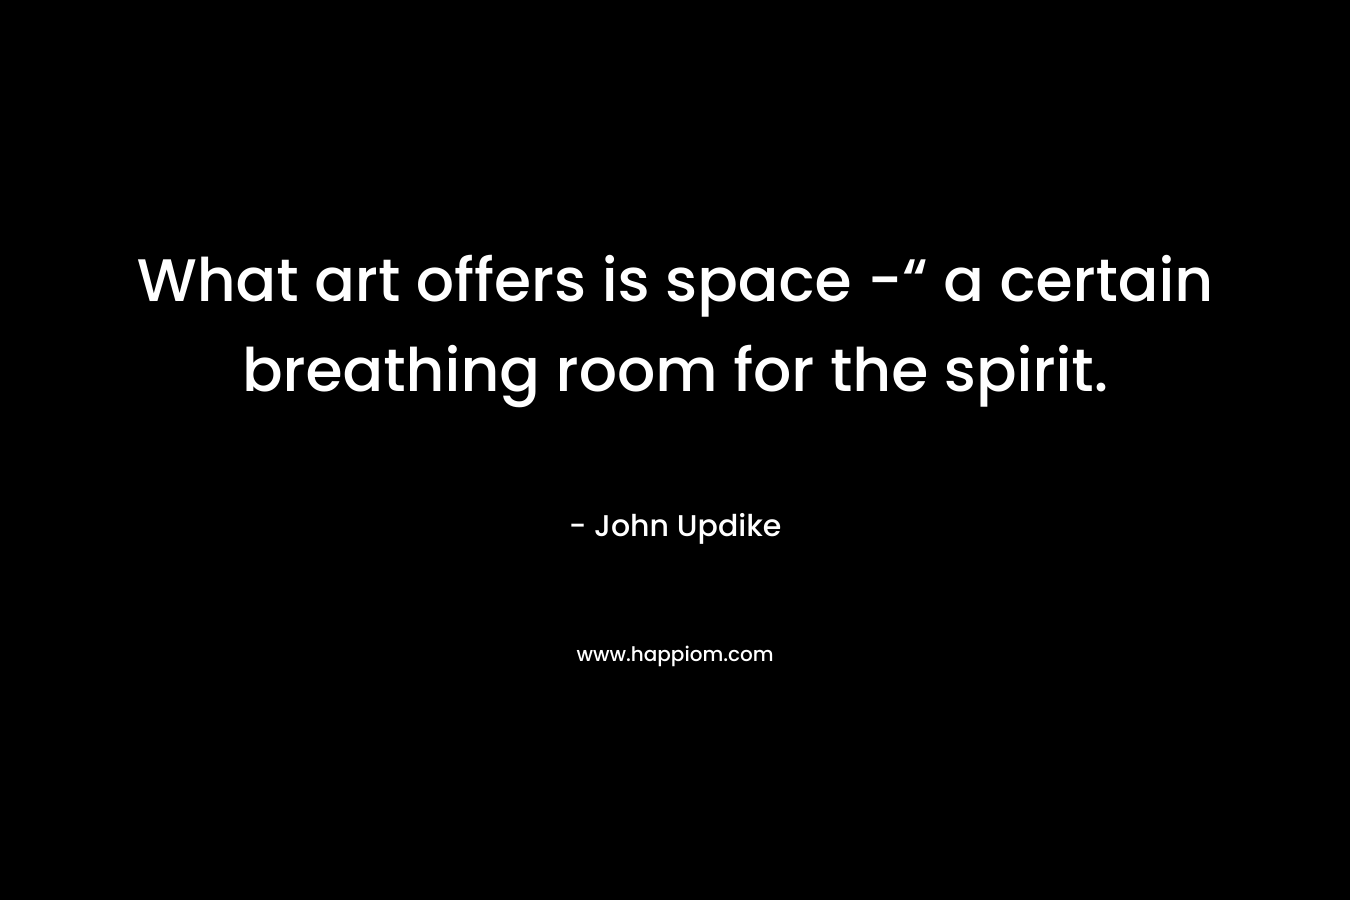 What art offers is space -“ a certain breathing room for the spirit.